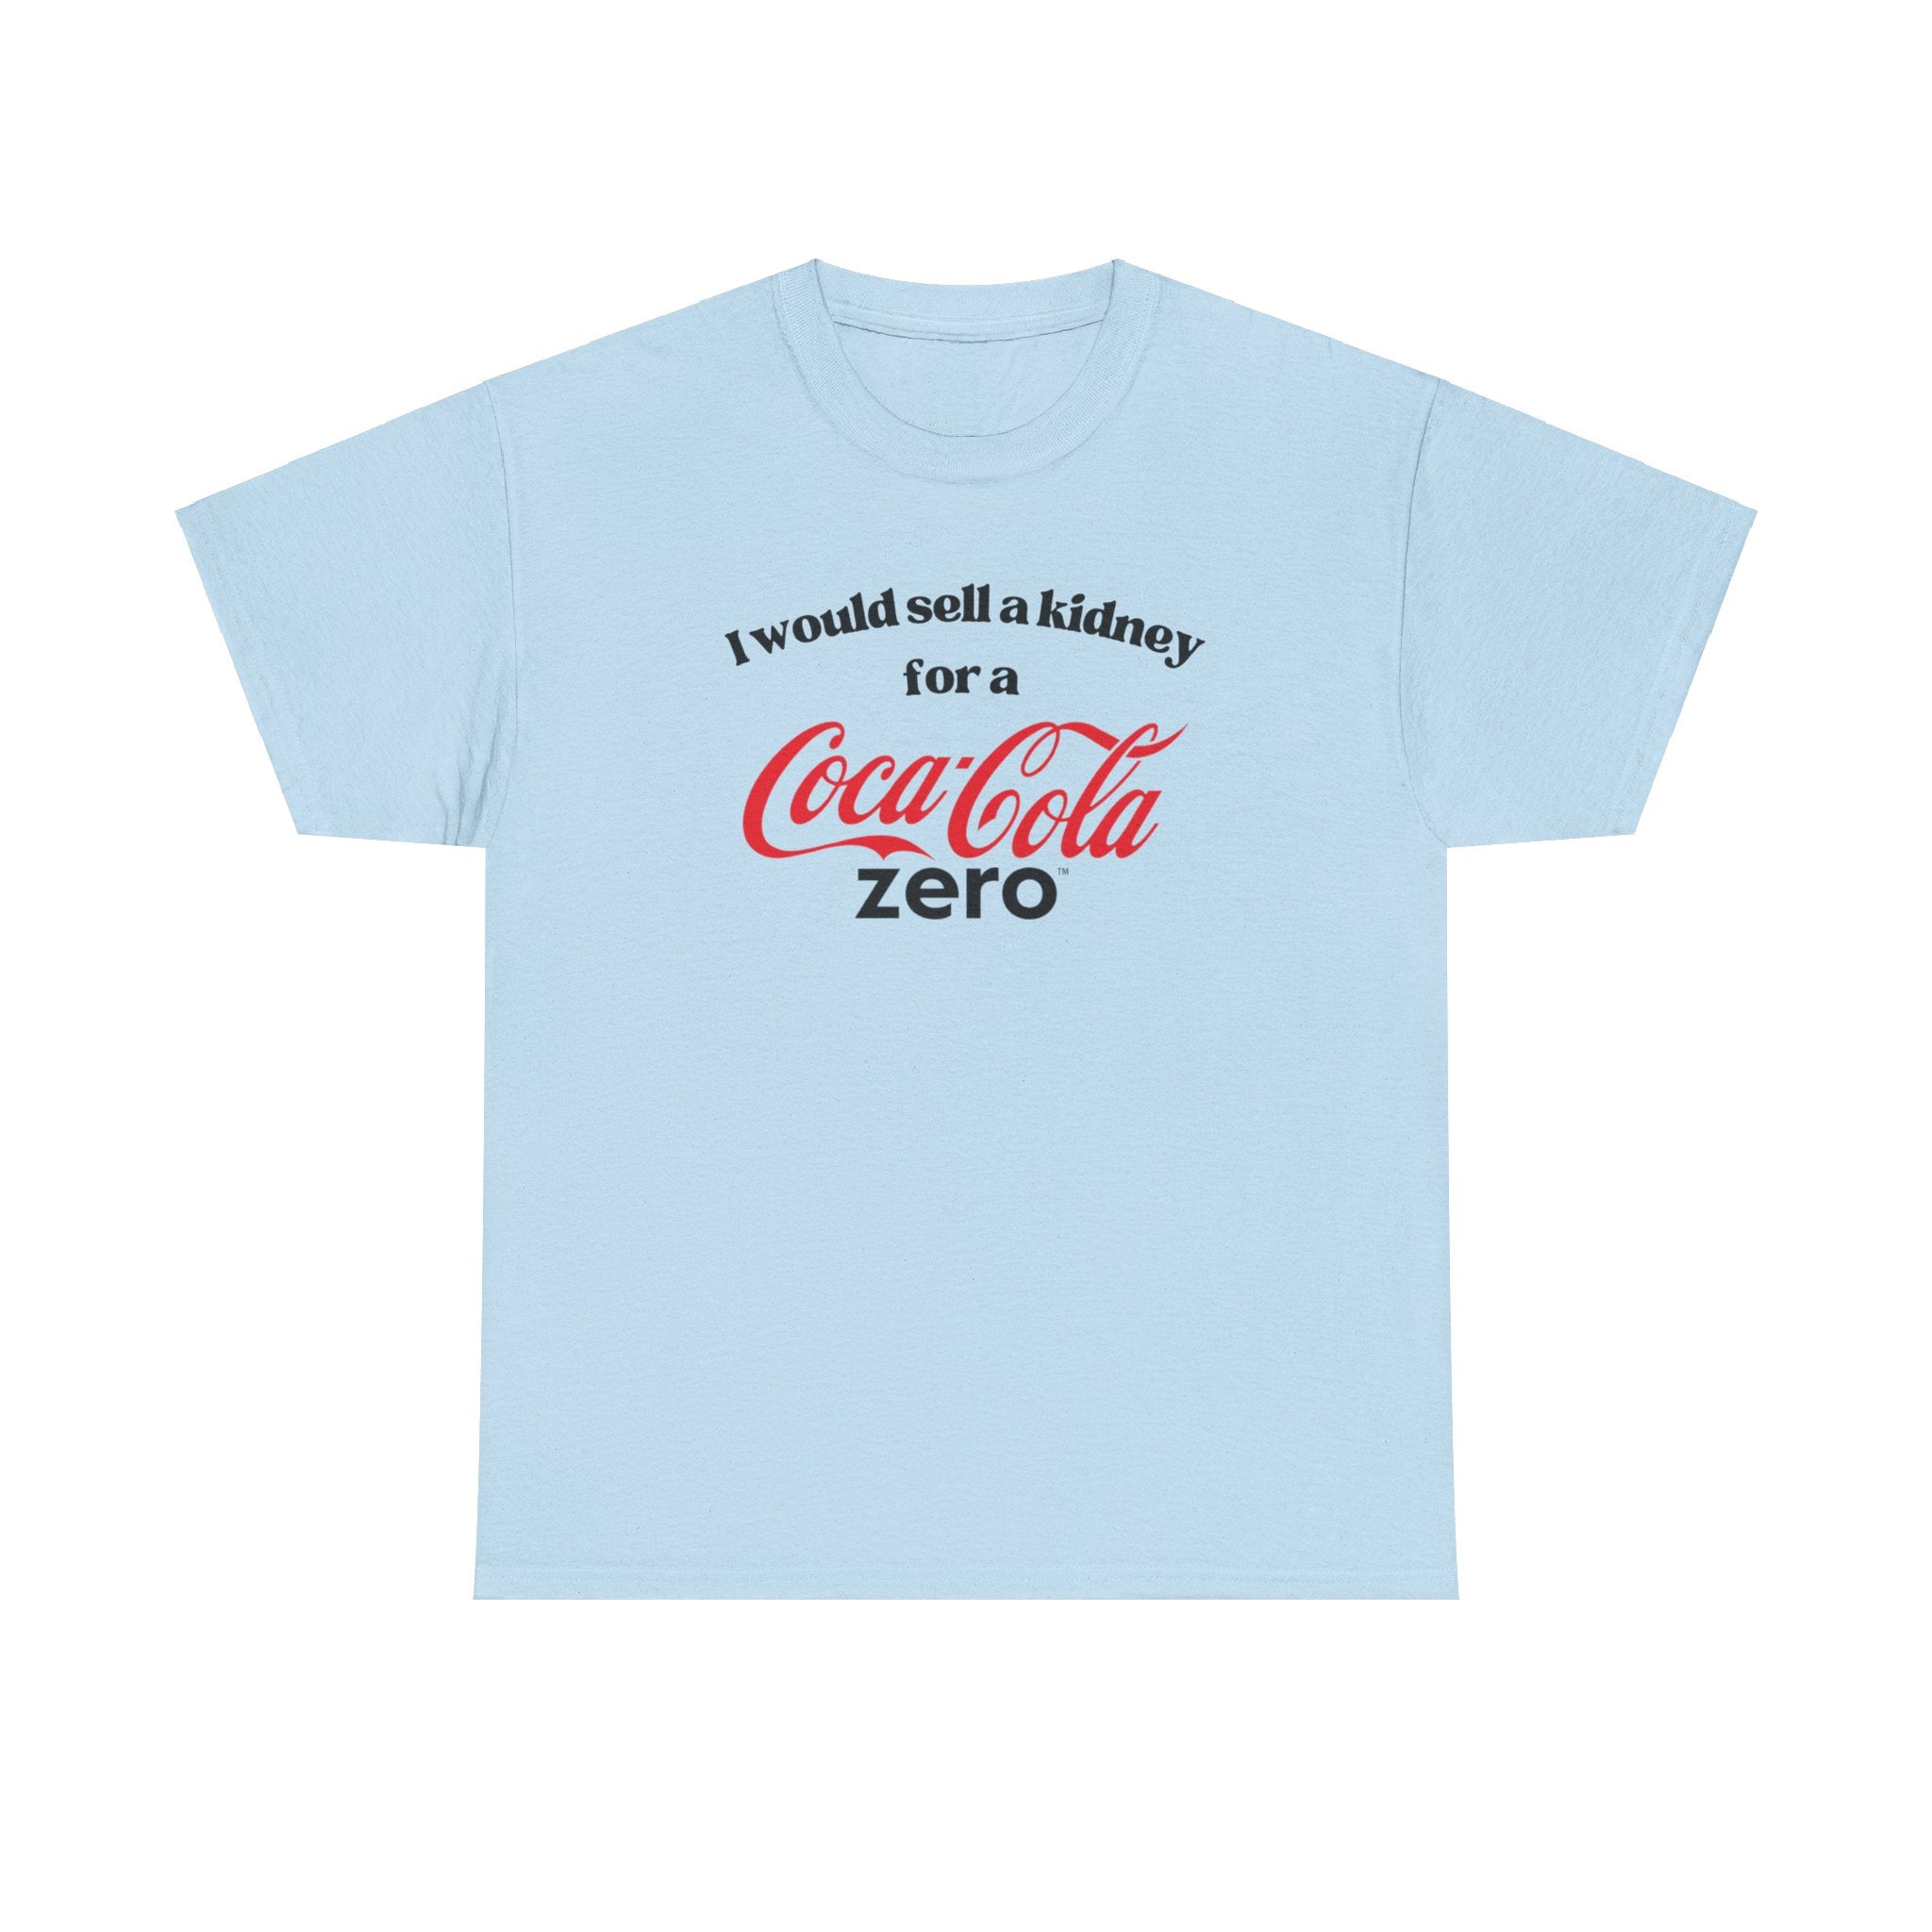 I Would Sell a Kidney for a Coke Zero